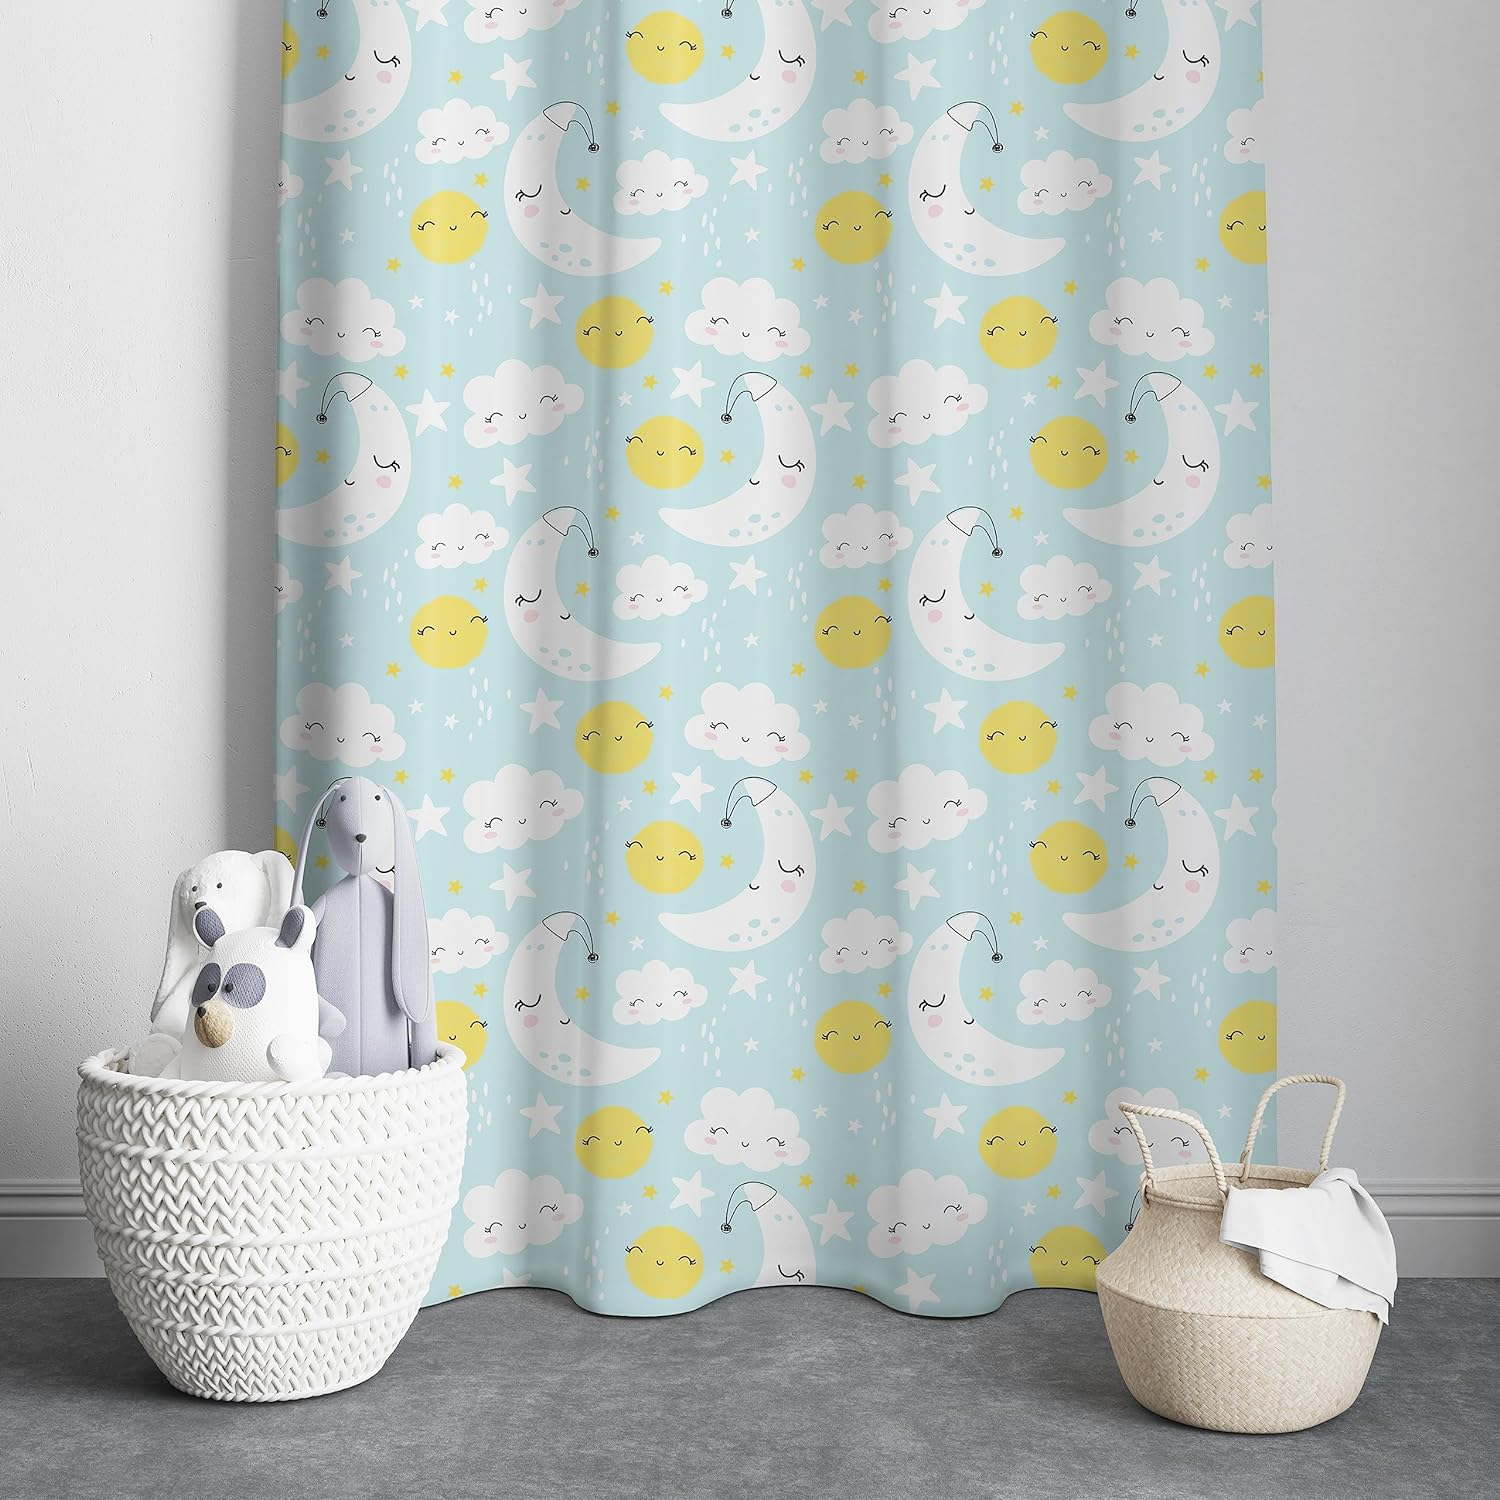 A cheerful blue and yellow curtain adorned with a cute cartoon sun, moon, and fluffy clouds.